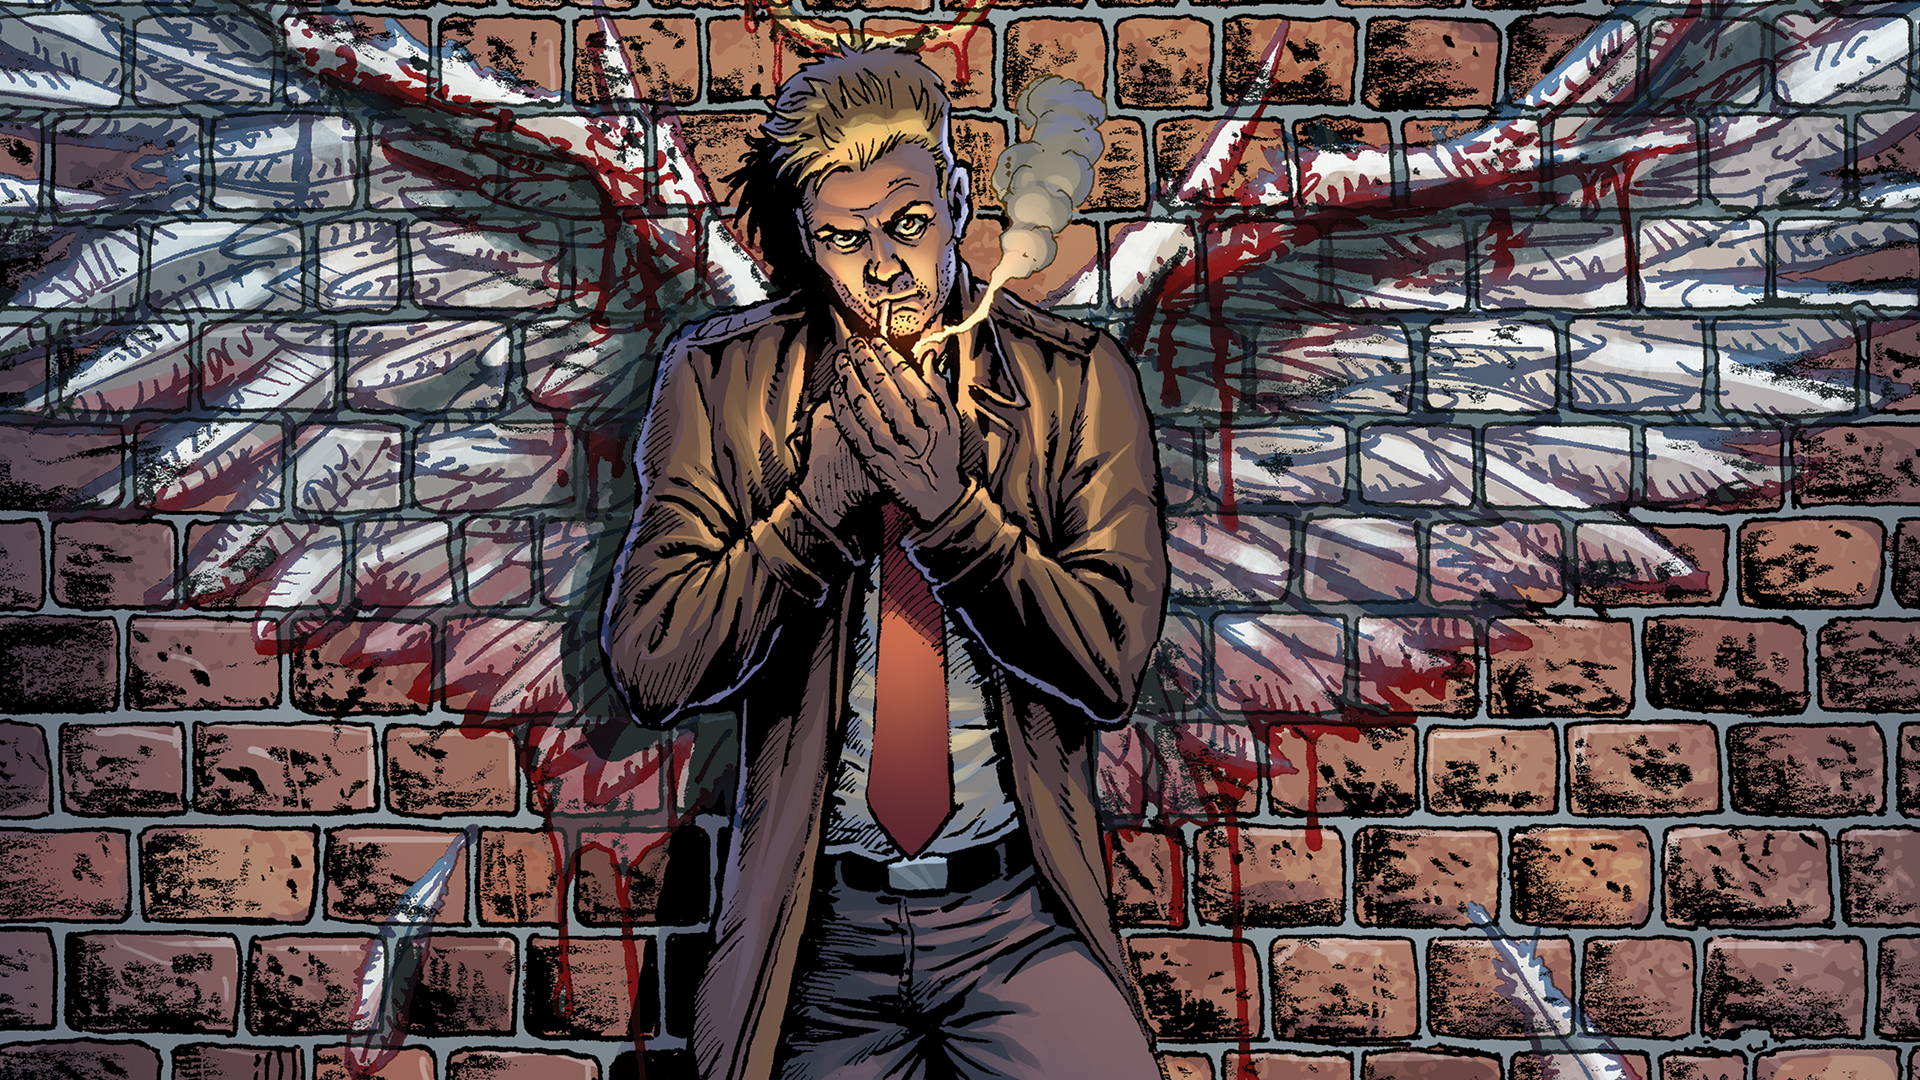 A comic panel illustrating the character of Hellblazer.